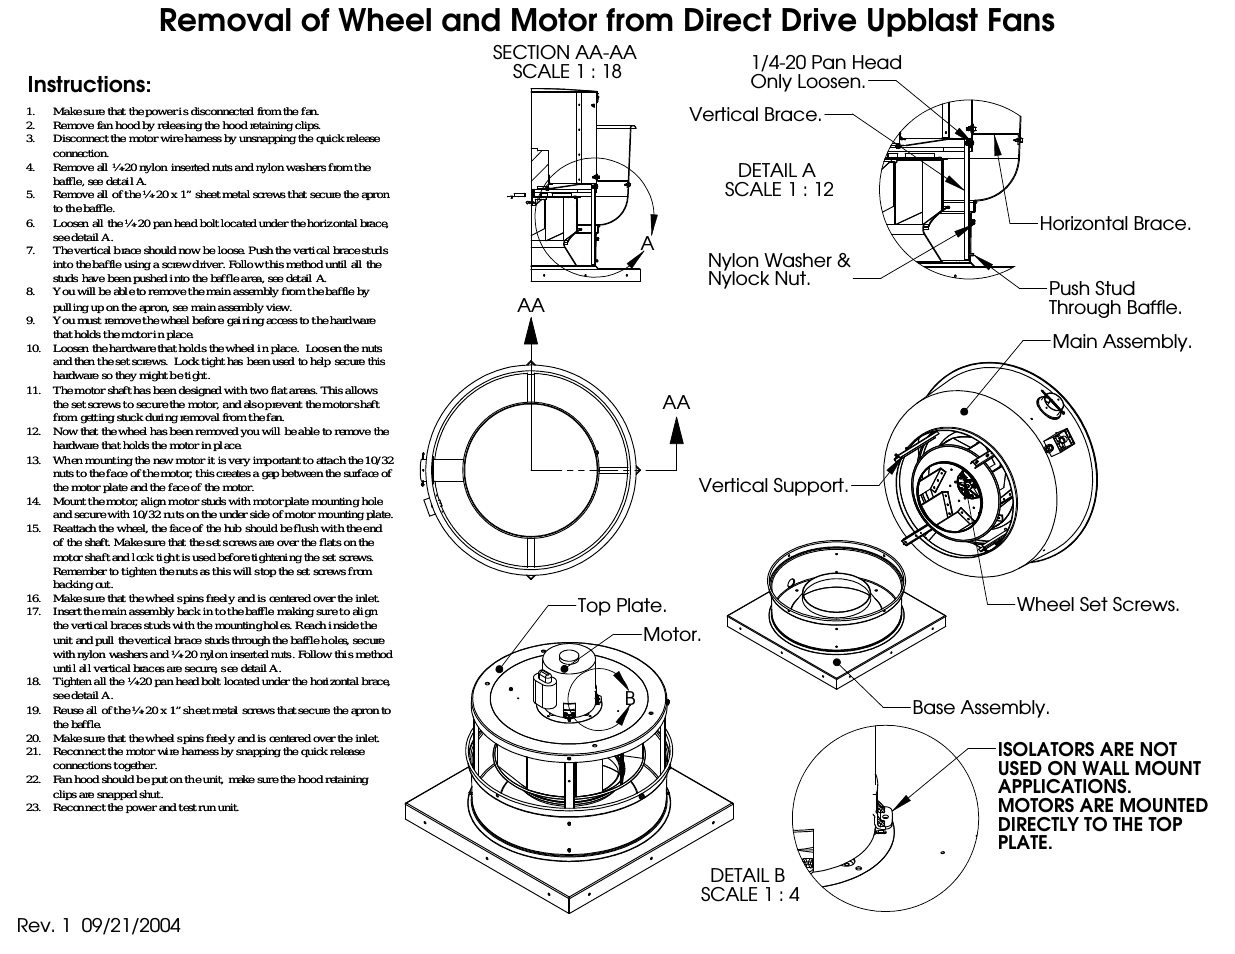 Removal of Wheel and Motor from Direct Drive Upblast Fans